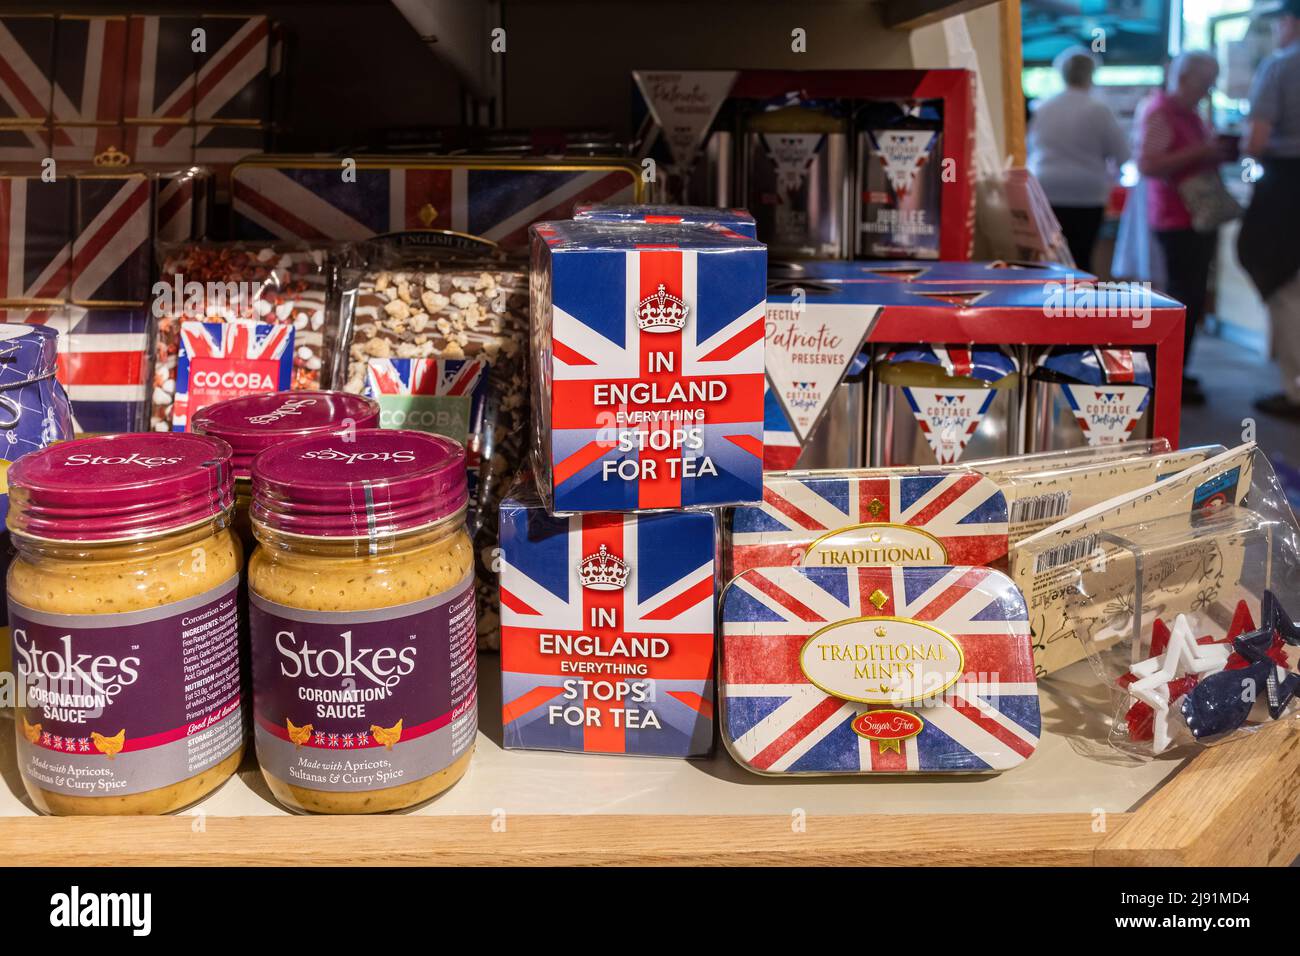 Platinum Jubilee souvenir teas and foods on sale in a farm shop, May 2022, England, UK Stock Photo